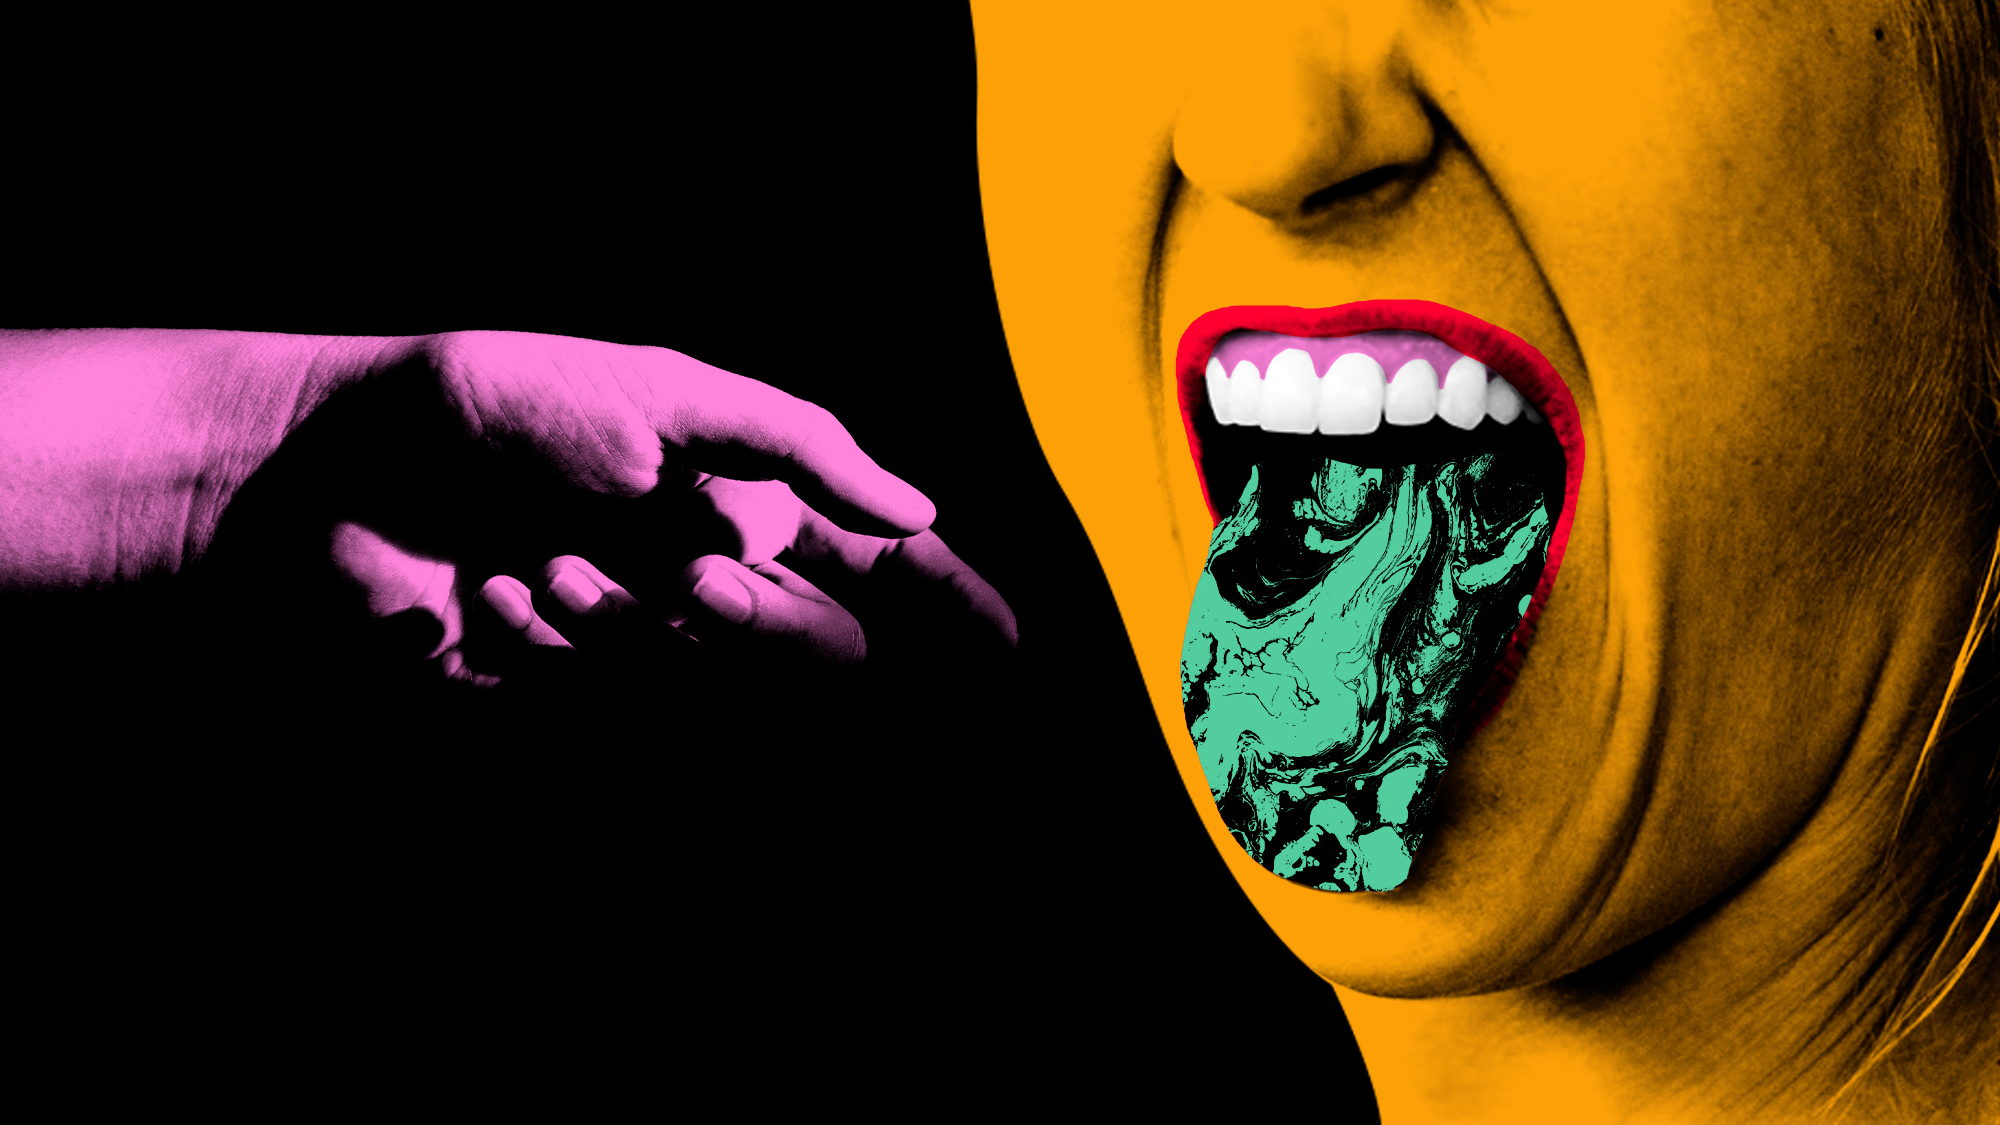 A purple hand reaching to touch a green tongue of an orange person with their mouth open frowning because they're tasting something digsuting